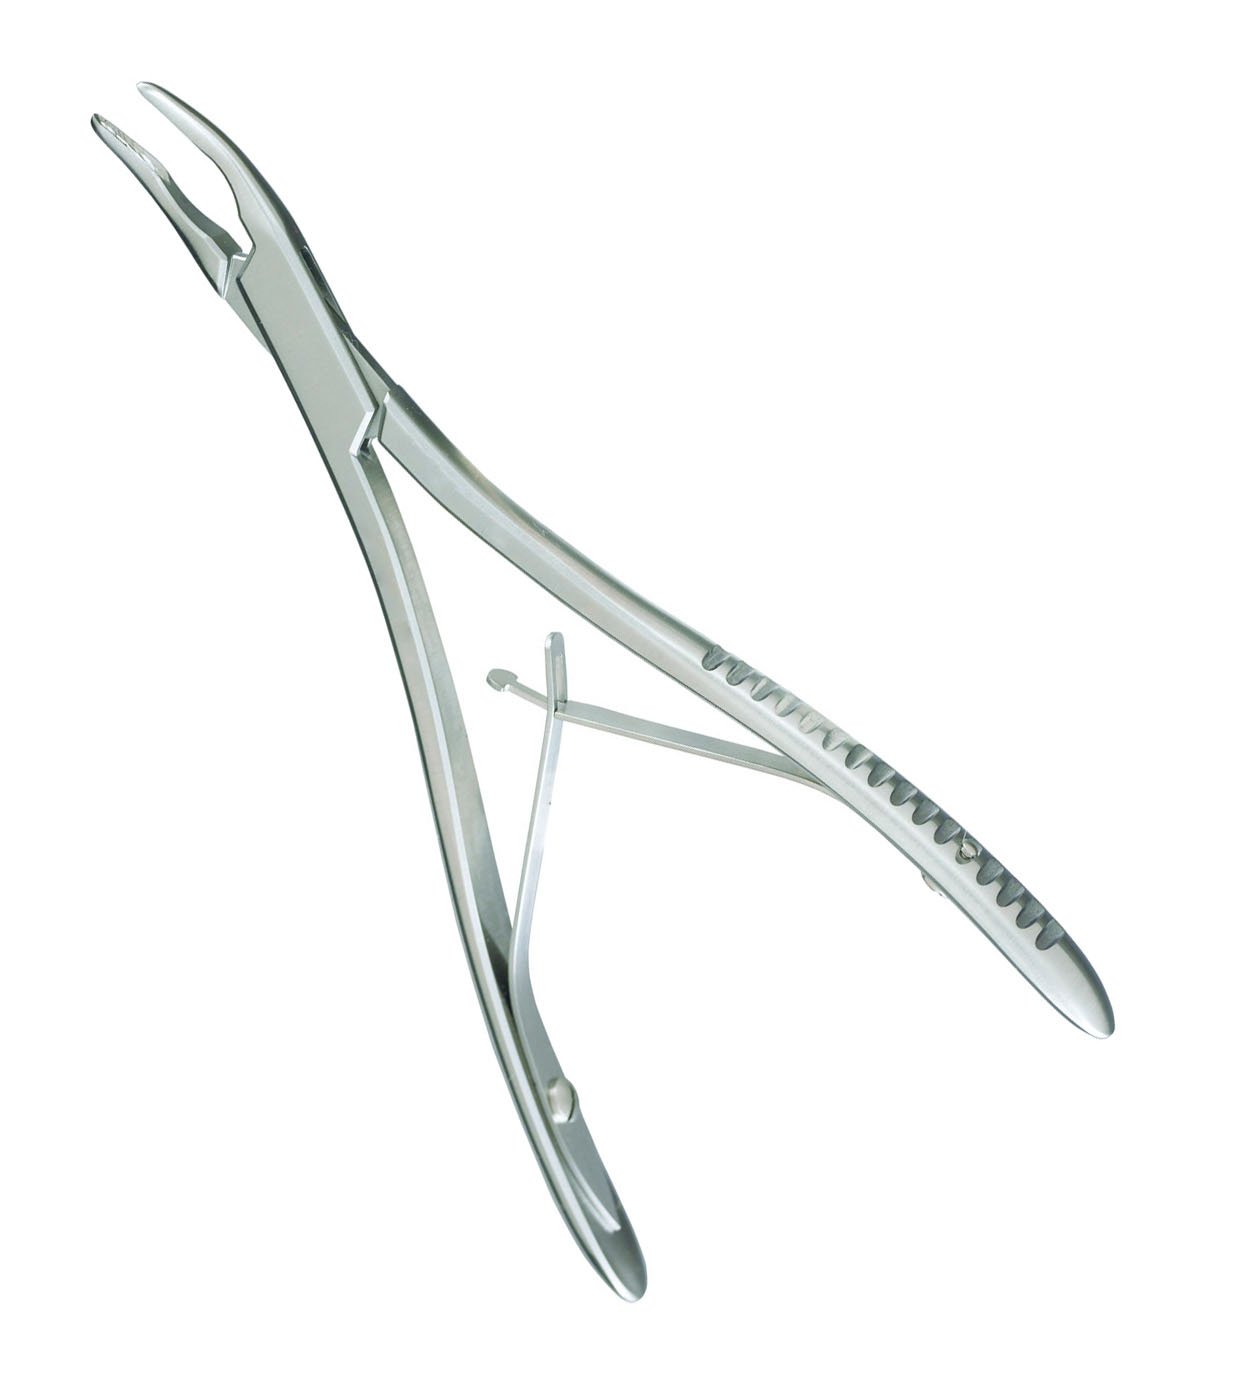 Friedman Rongeur, Delicate 4.0 Mm Jaws, Curved, 5 1/2" (14.0 Cm)